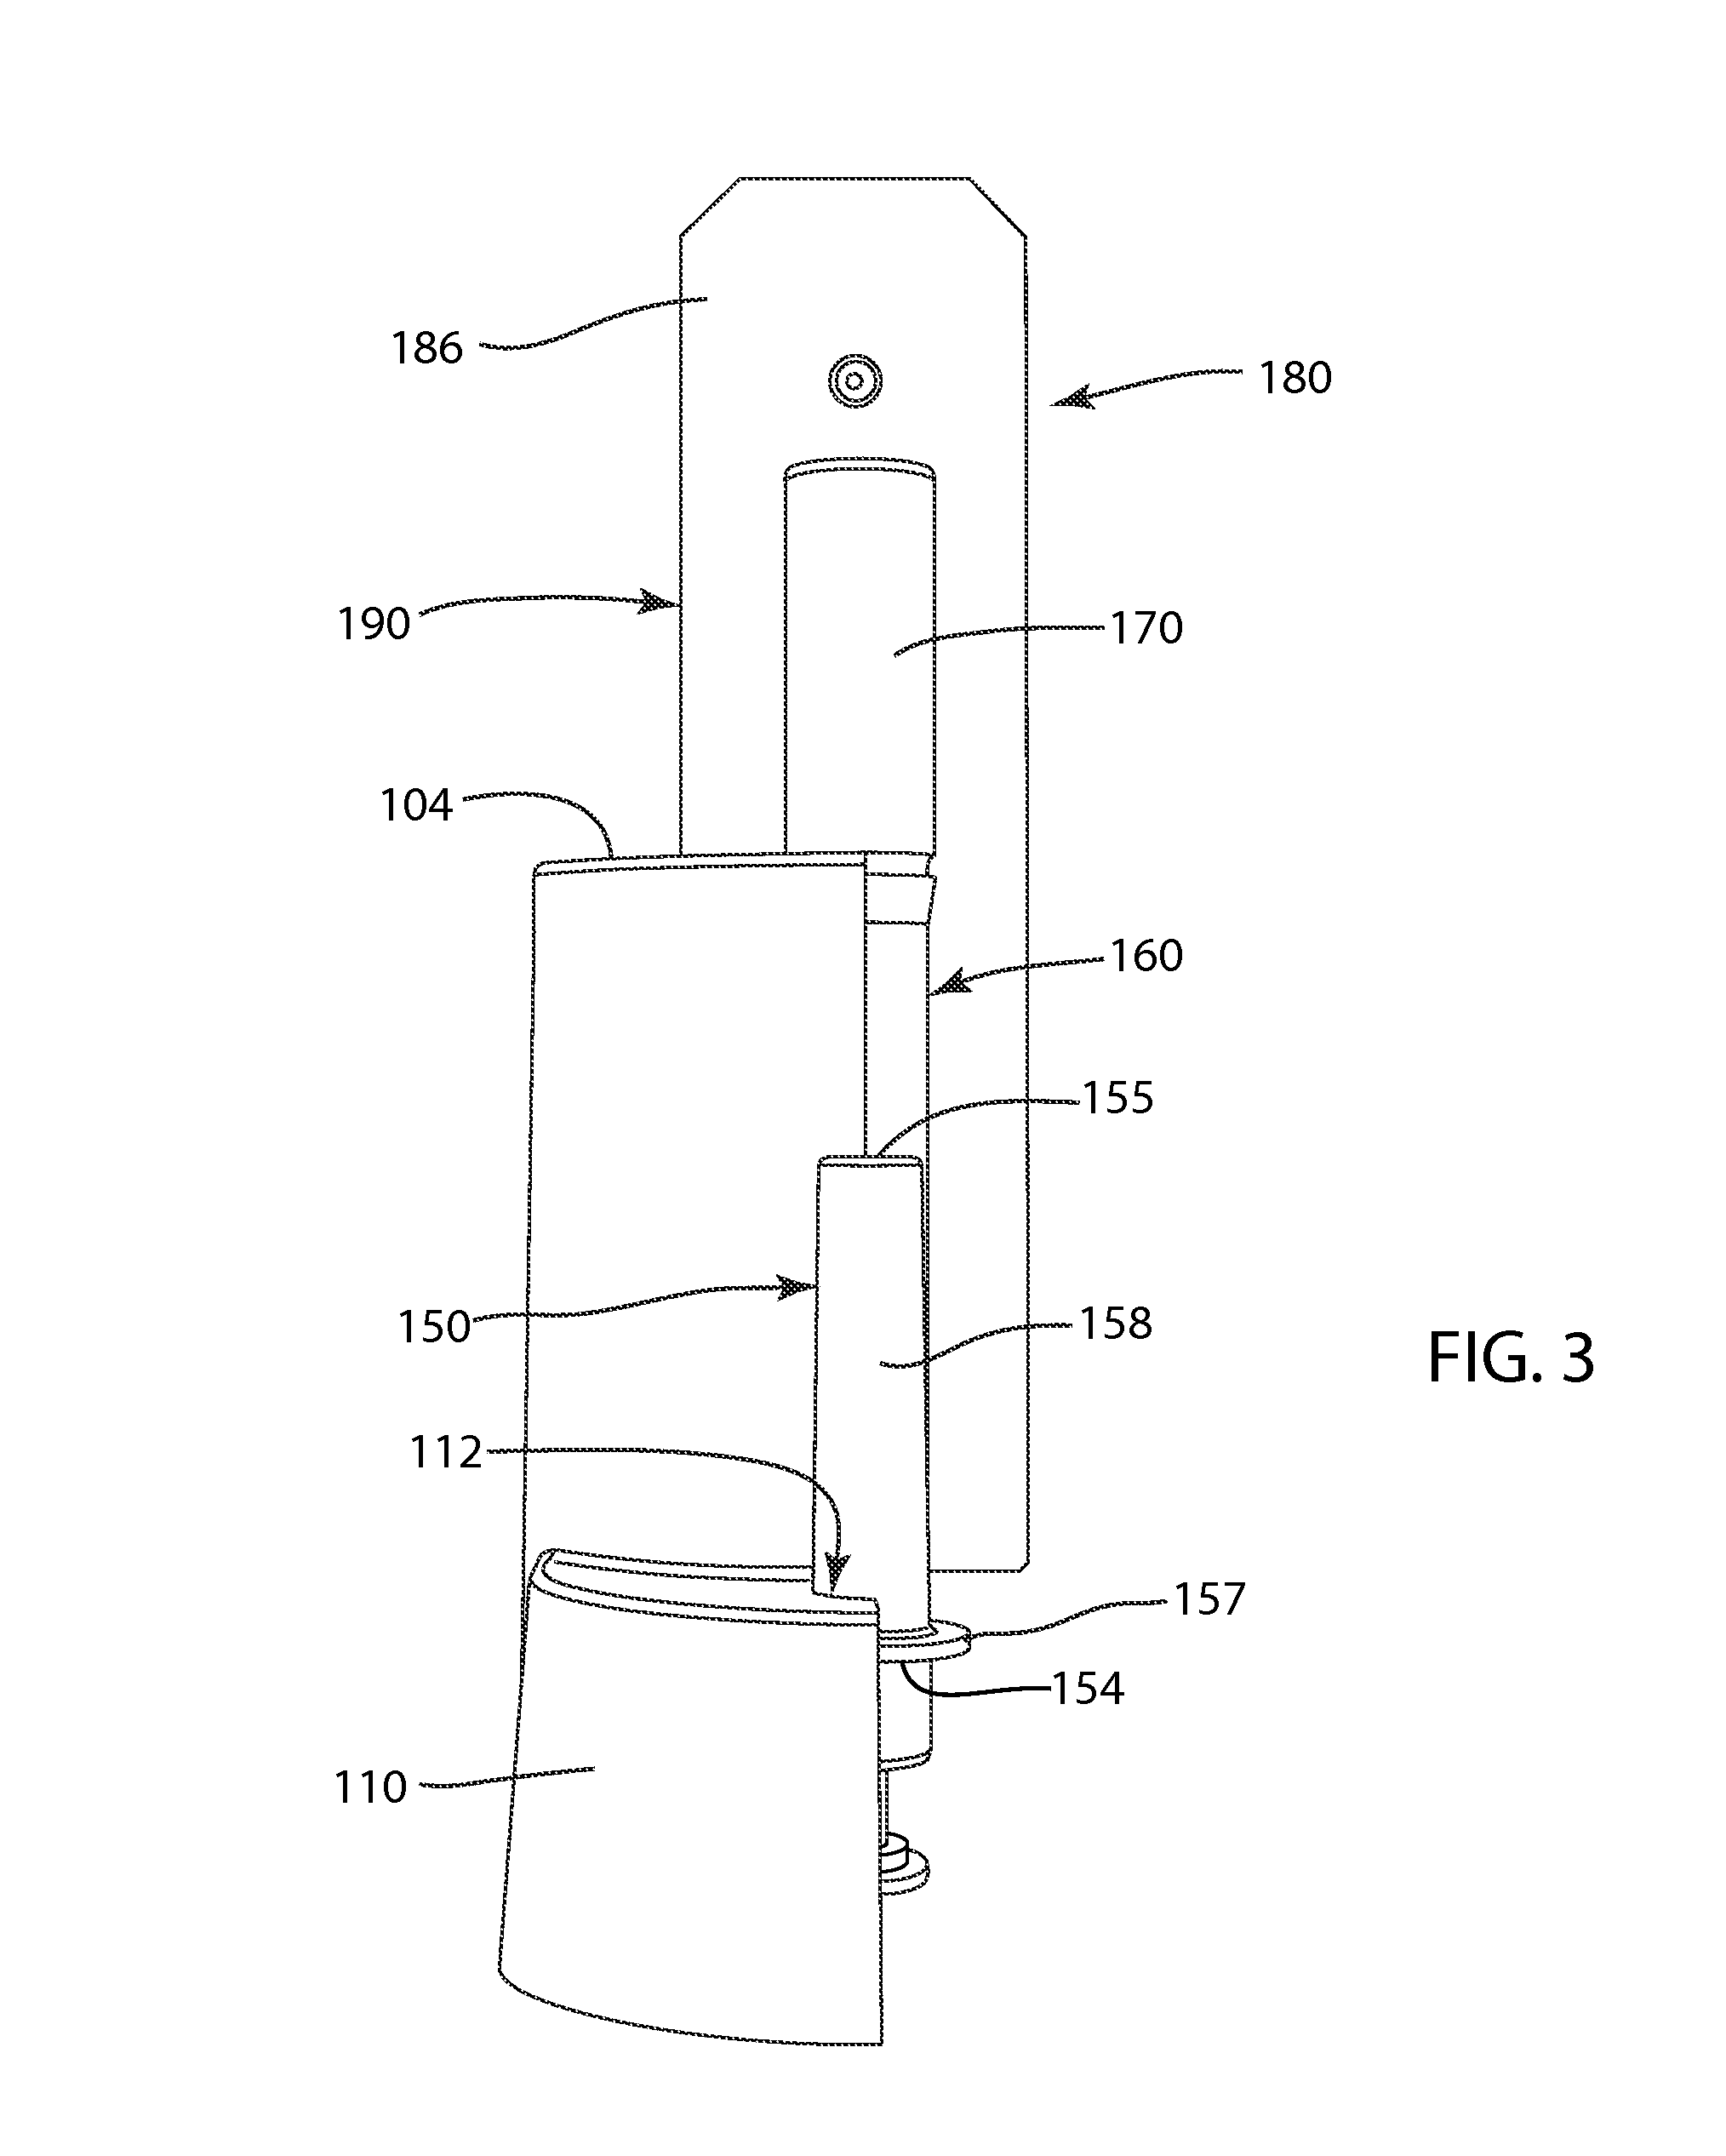 System and Method for Lateral Flow Immunoassay Testing